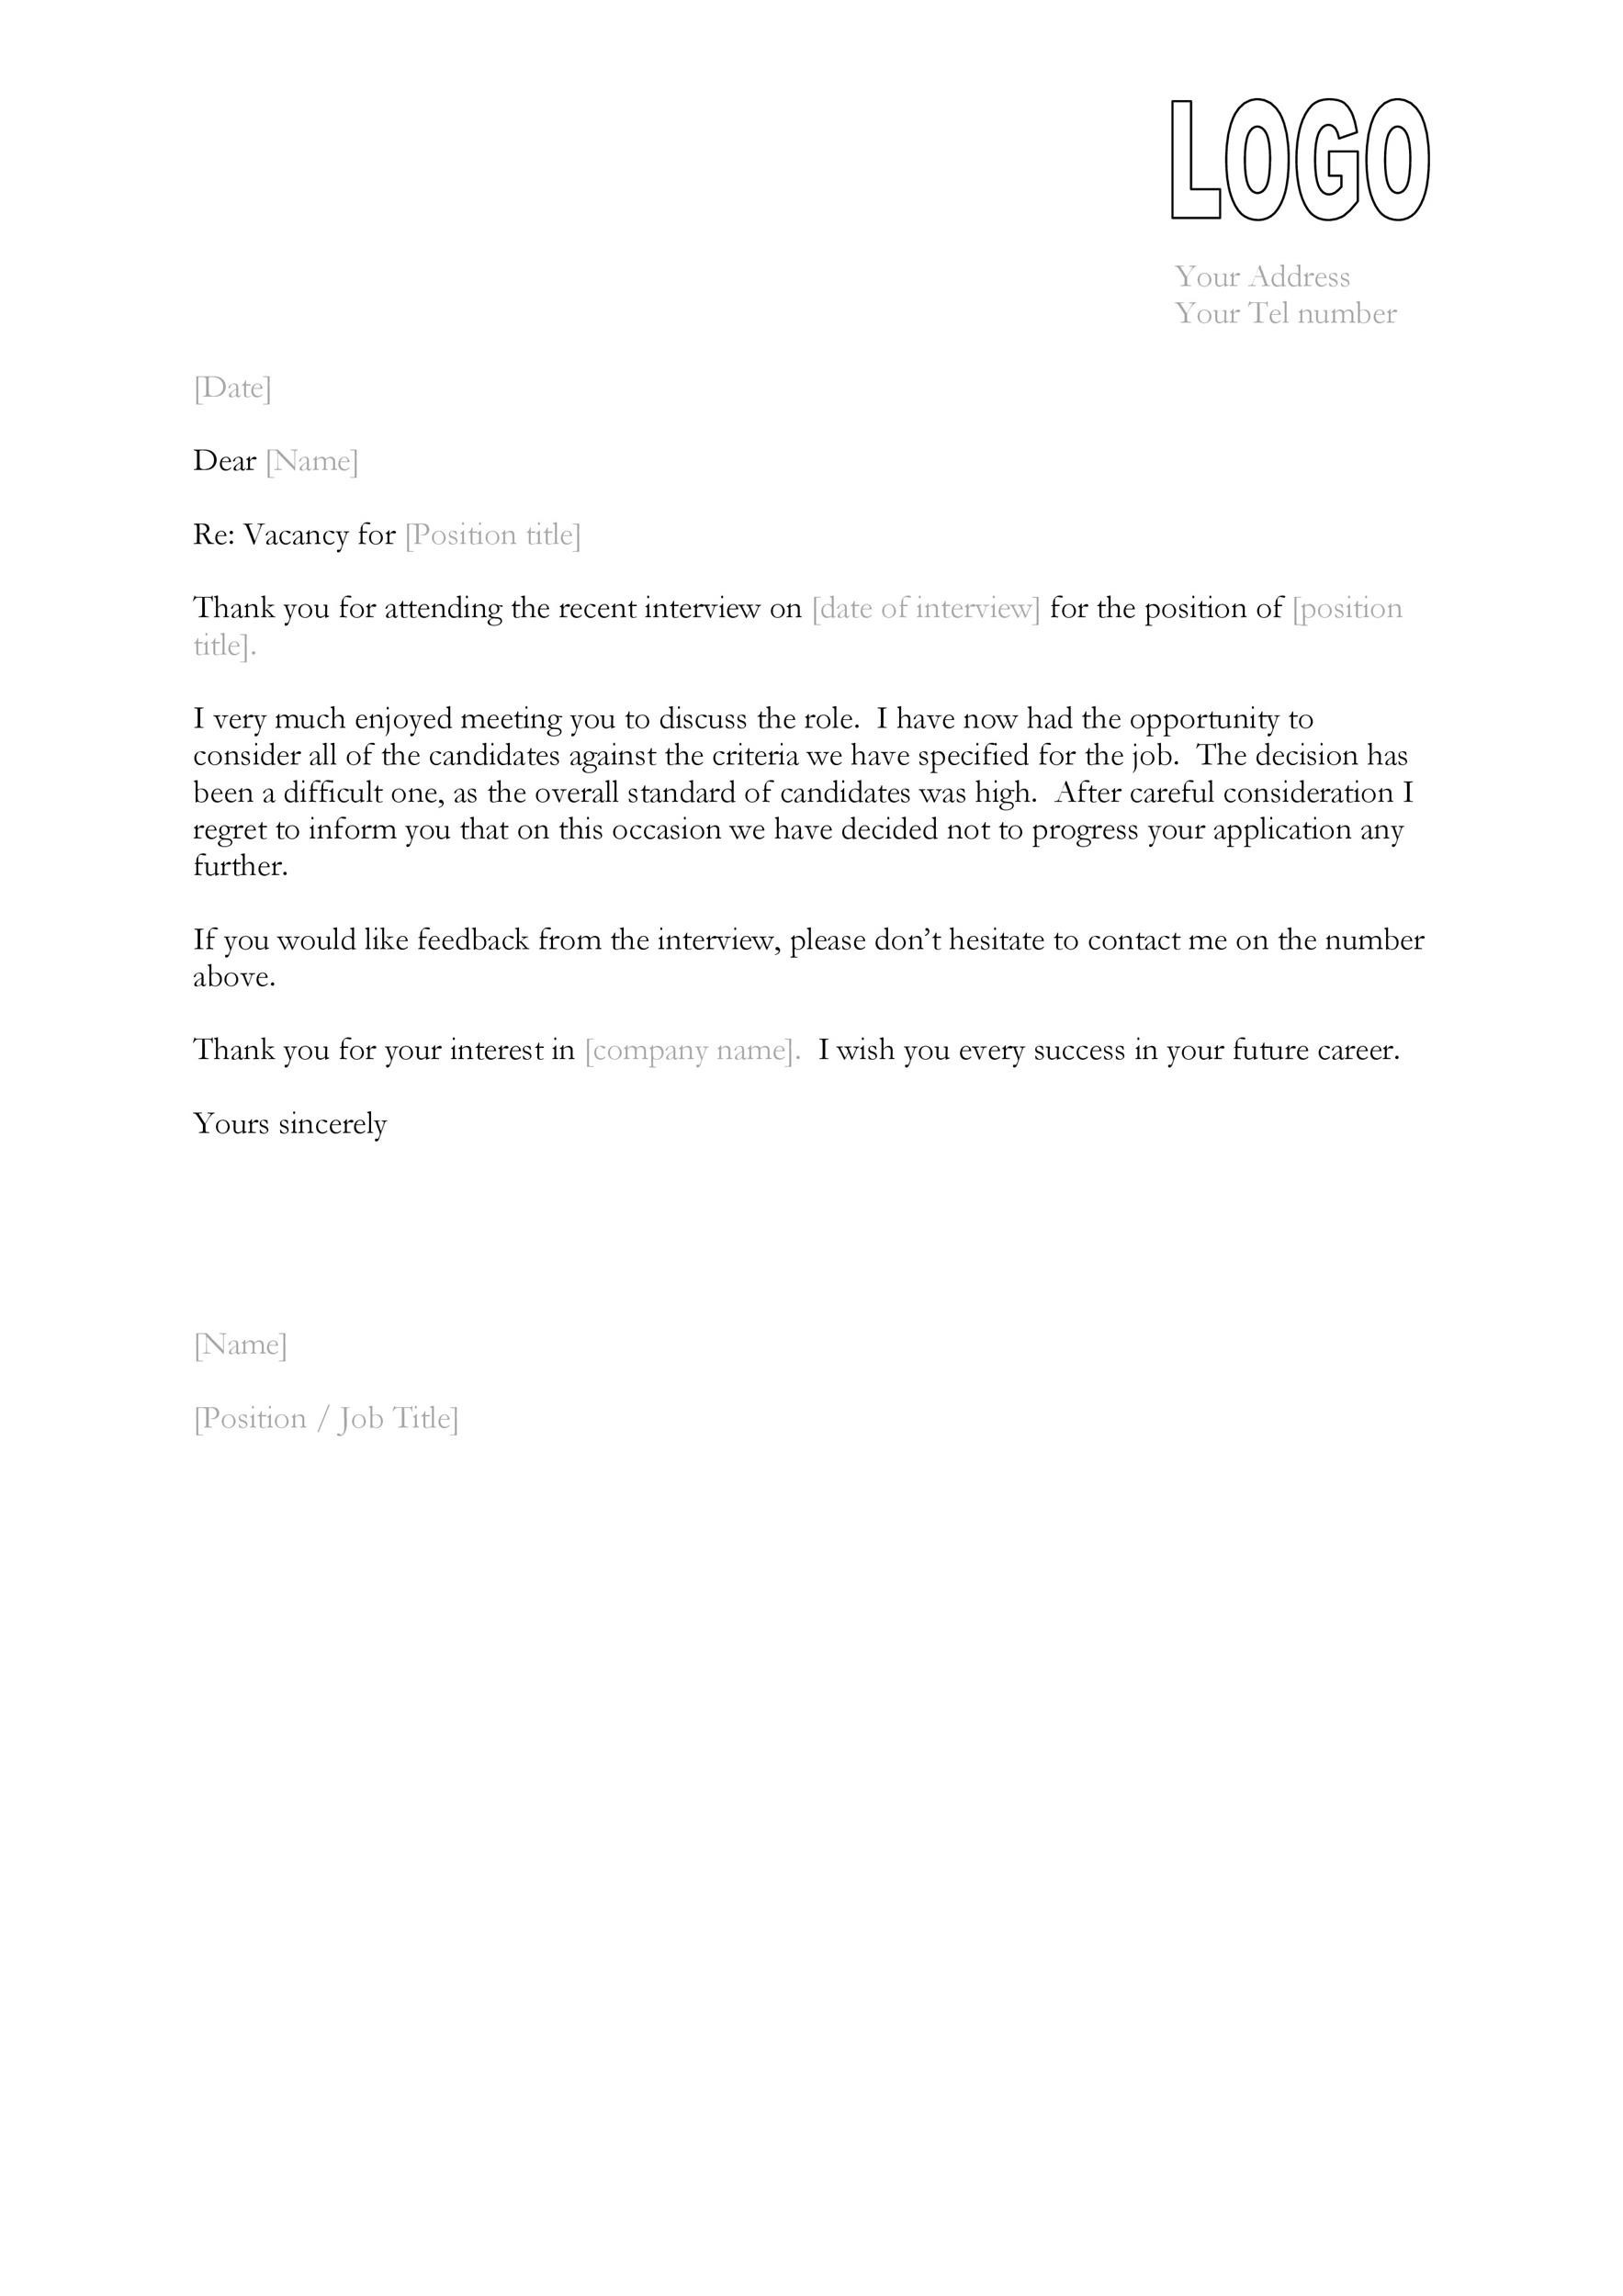 Reject Letter To Candidate from templatelab.com